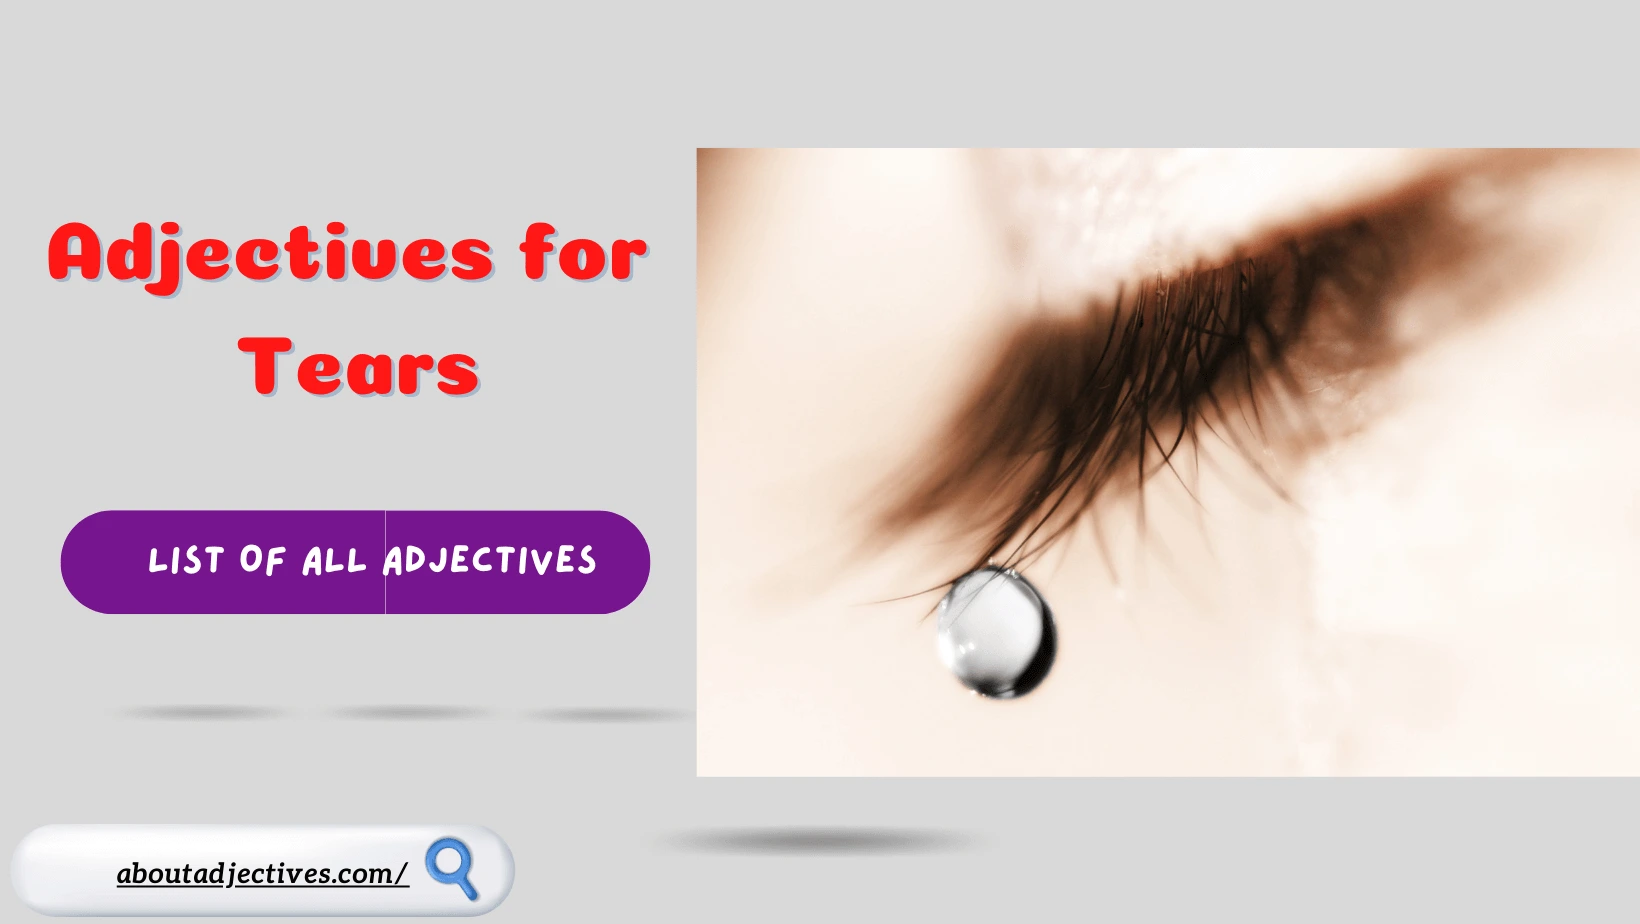 Adjectives for tears